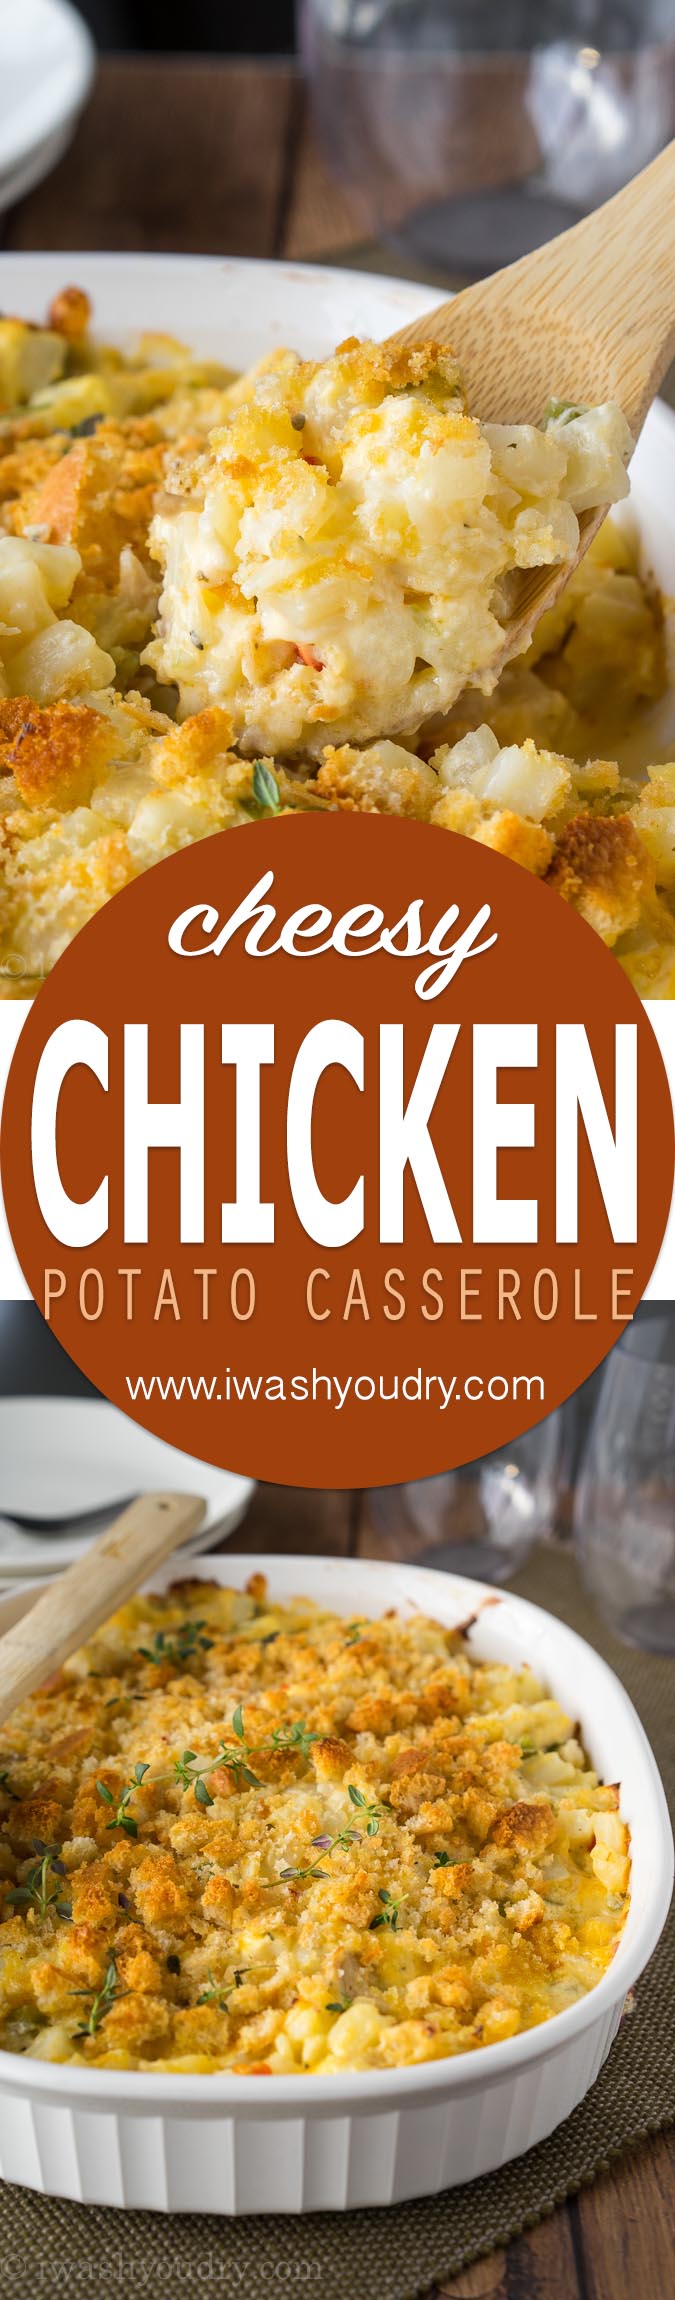 My whole family loved this Cheesy Chicken Potato Casserole! It came together so quickly and tasted amazing. Going to make it again very soon!